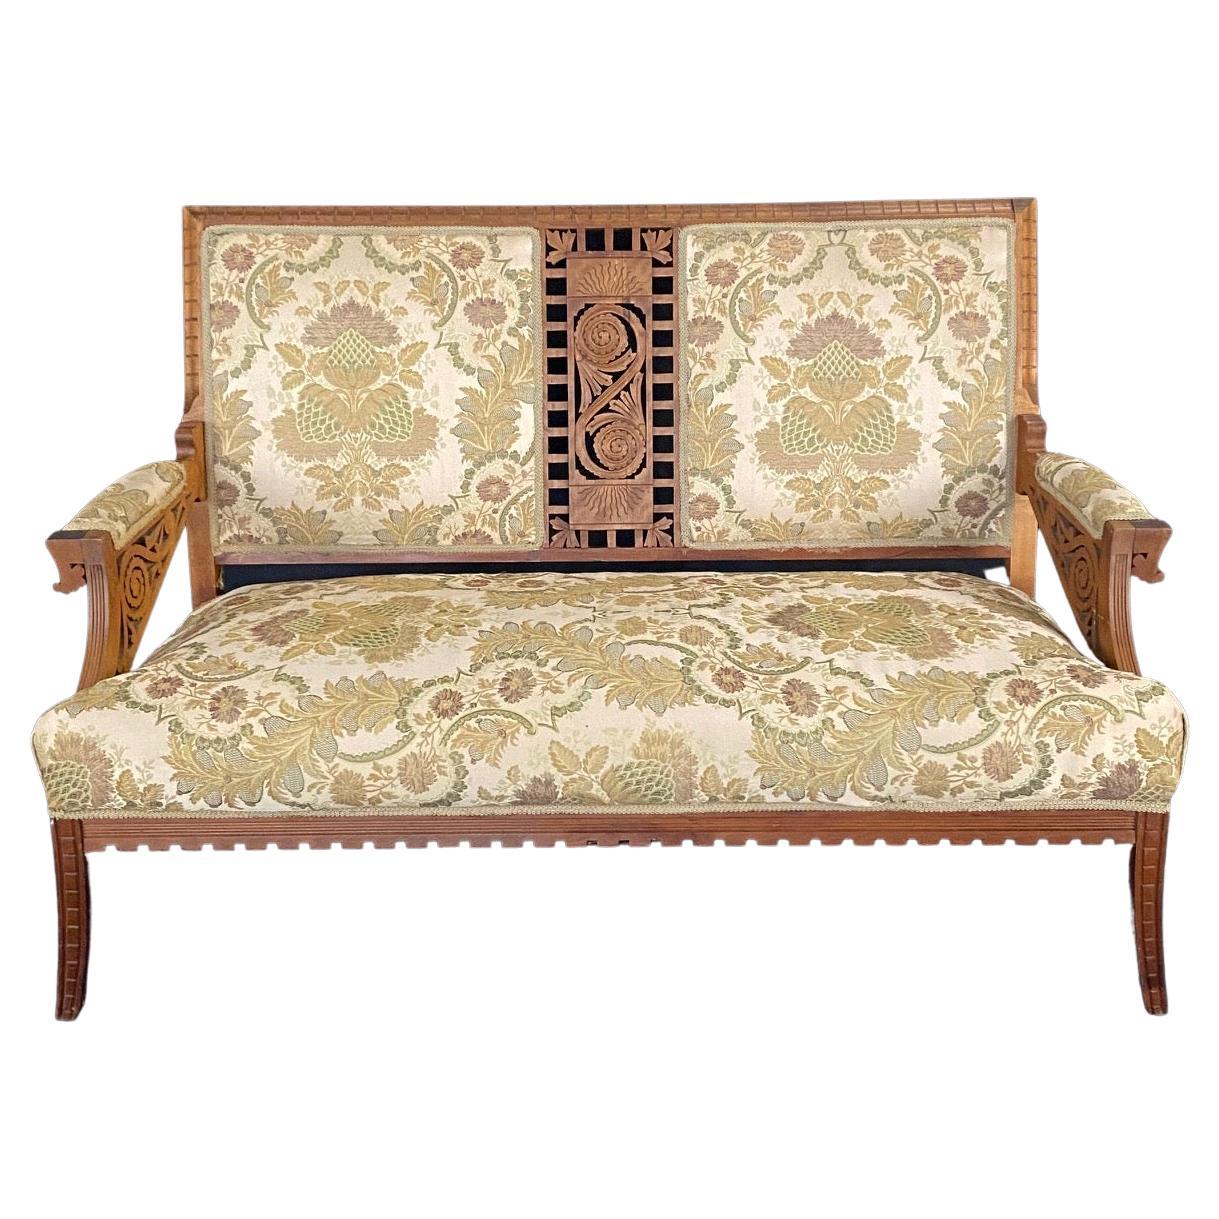 Authentic Rare Eastlake Aesthetic Movement Ornate Carved Walnut Loveseat For Sale